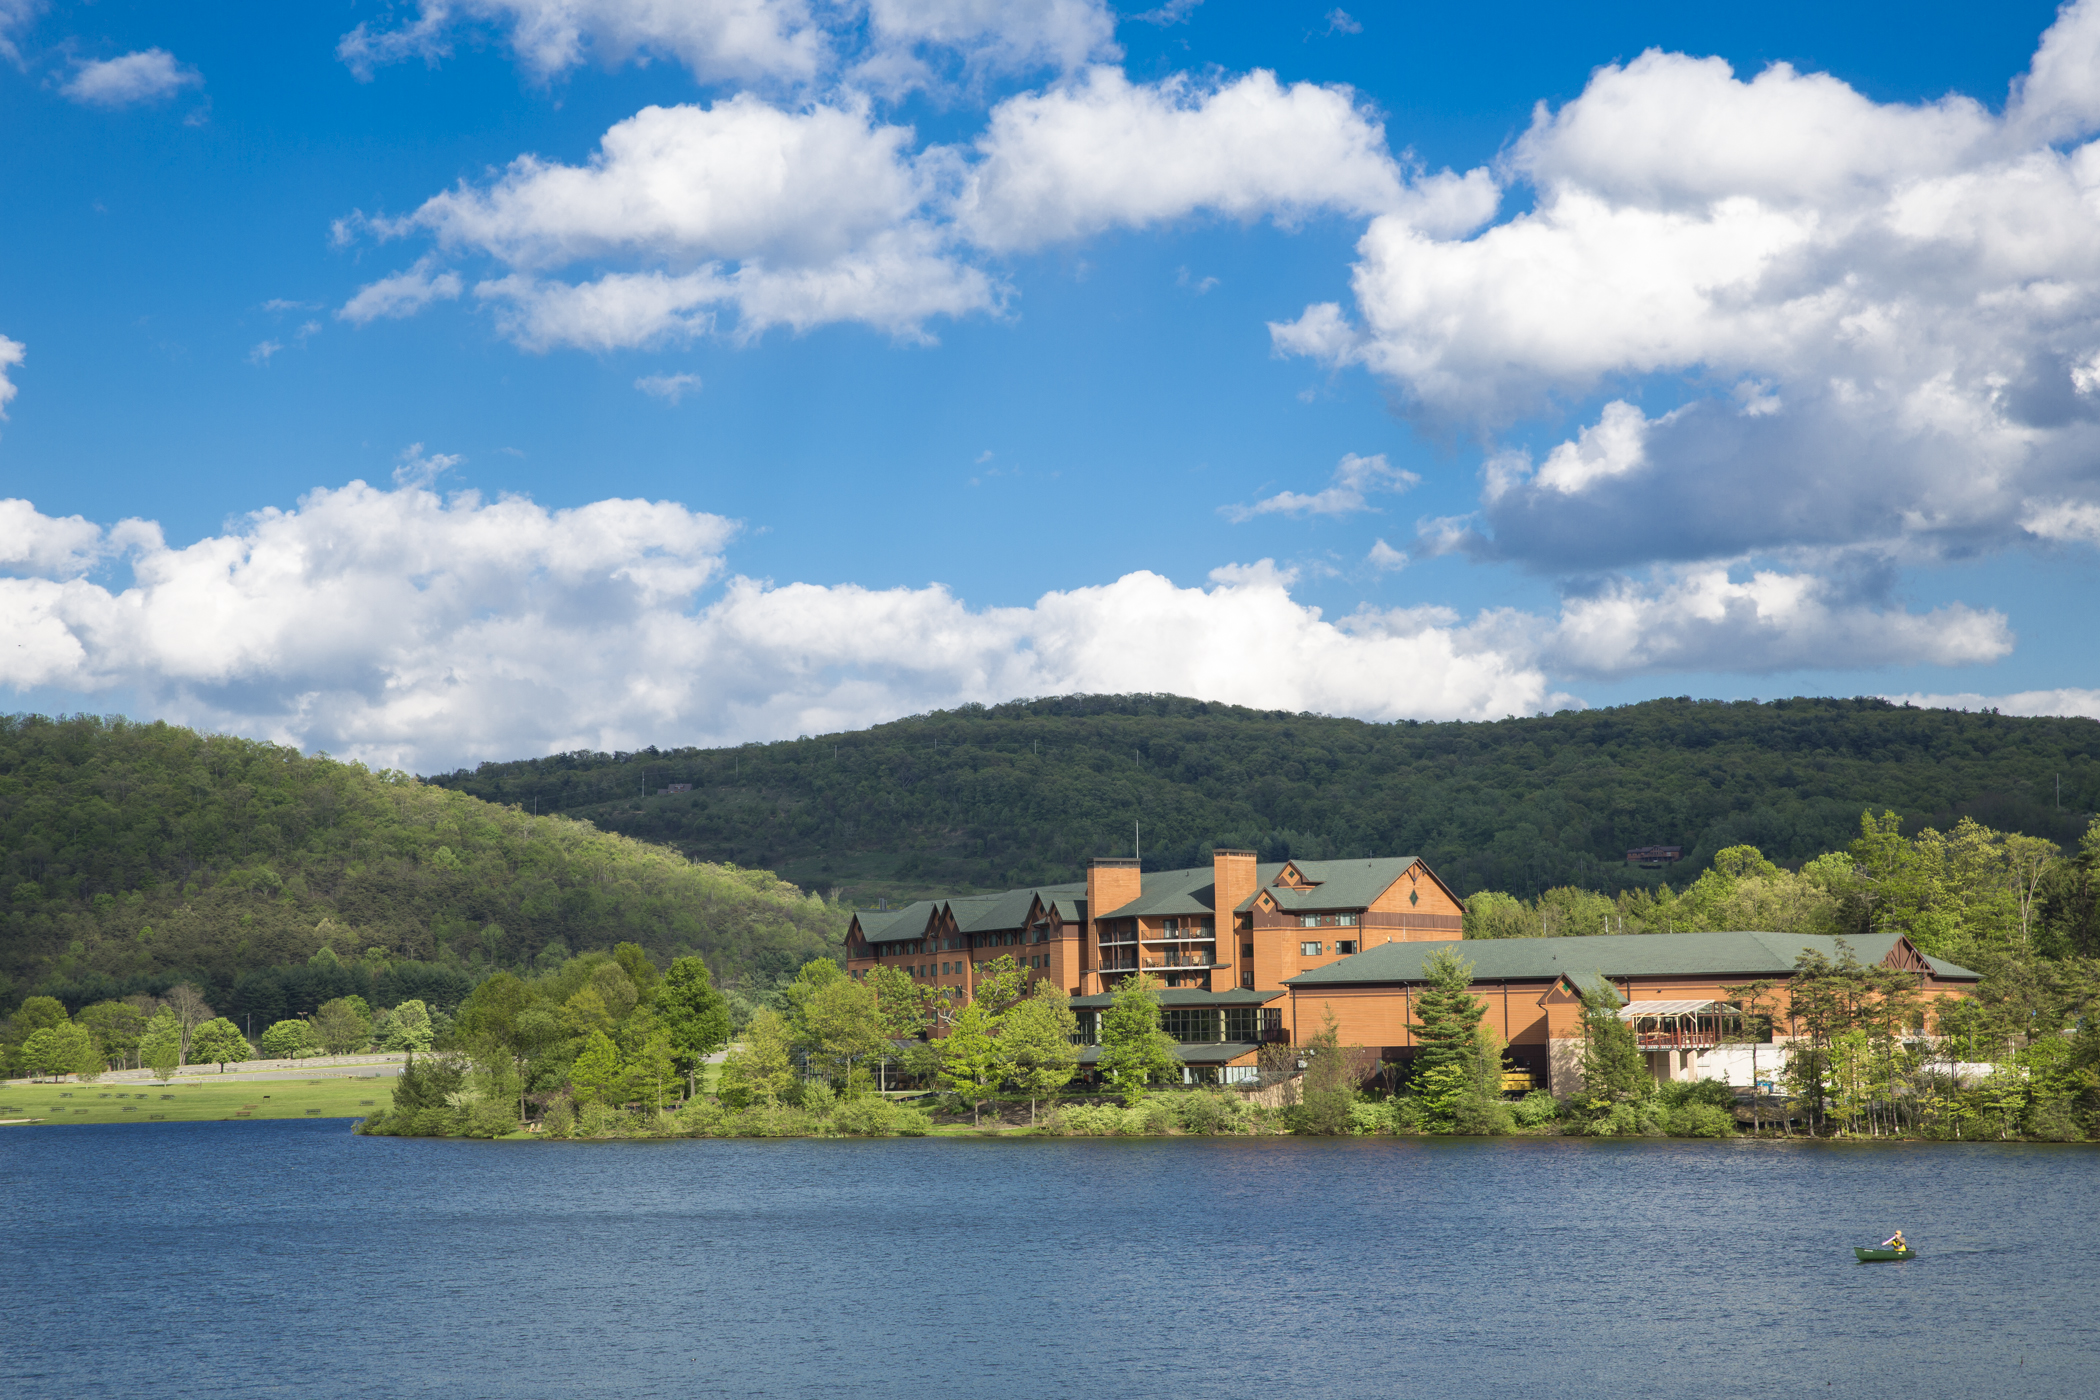 rocky gap state park and casino